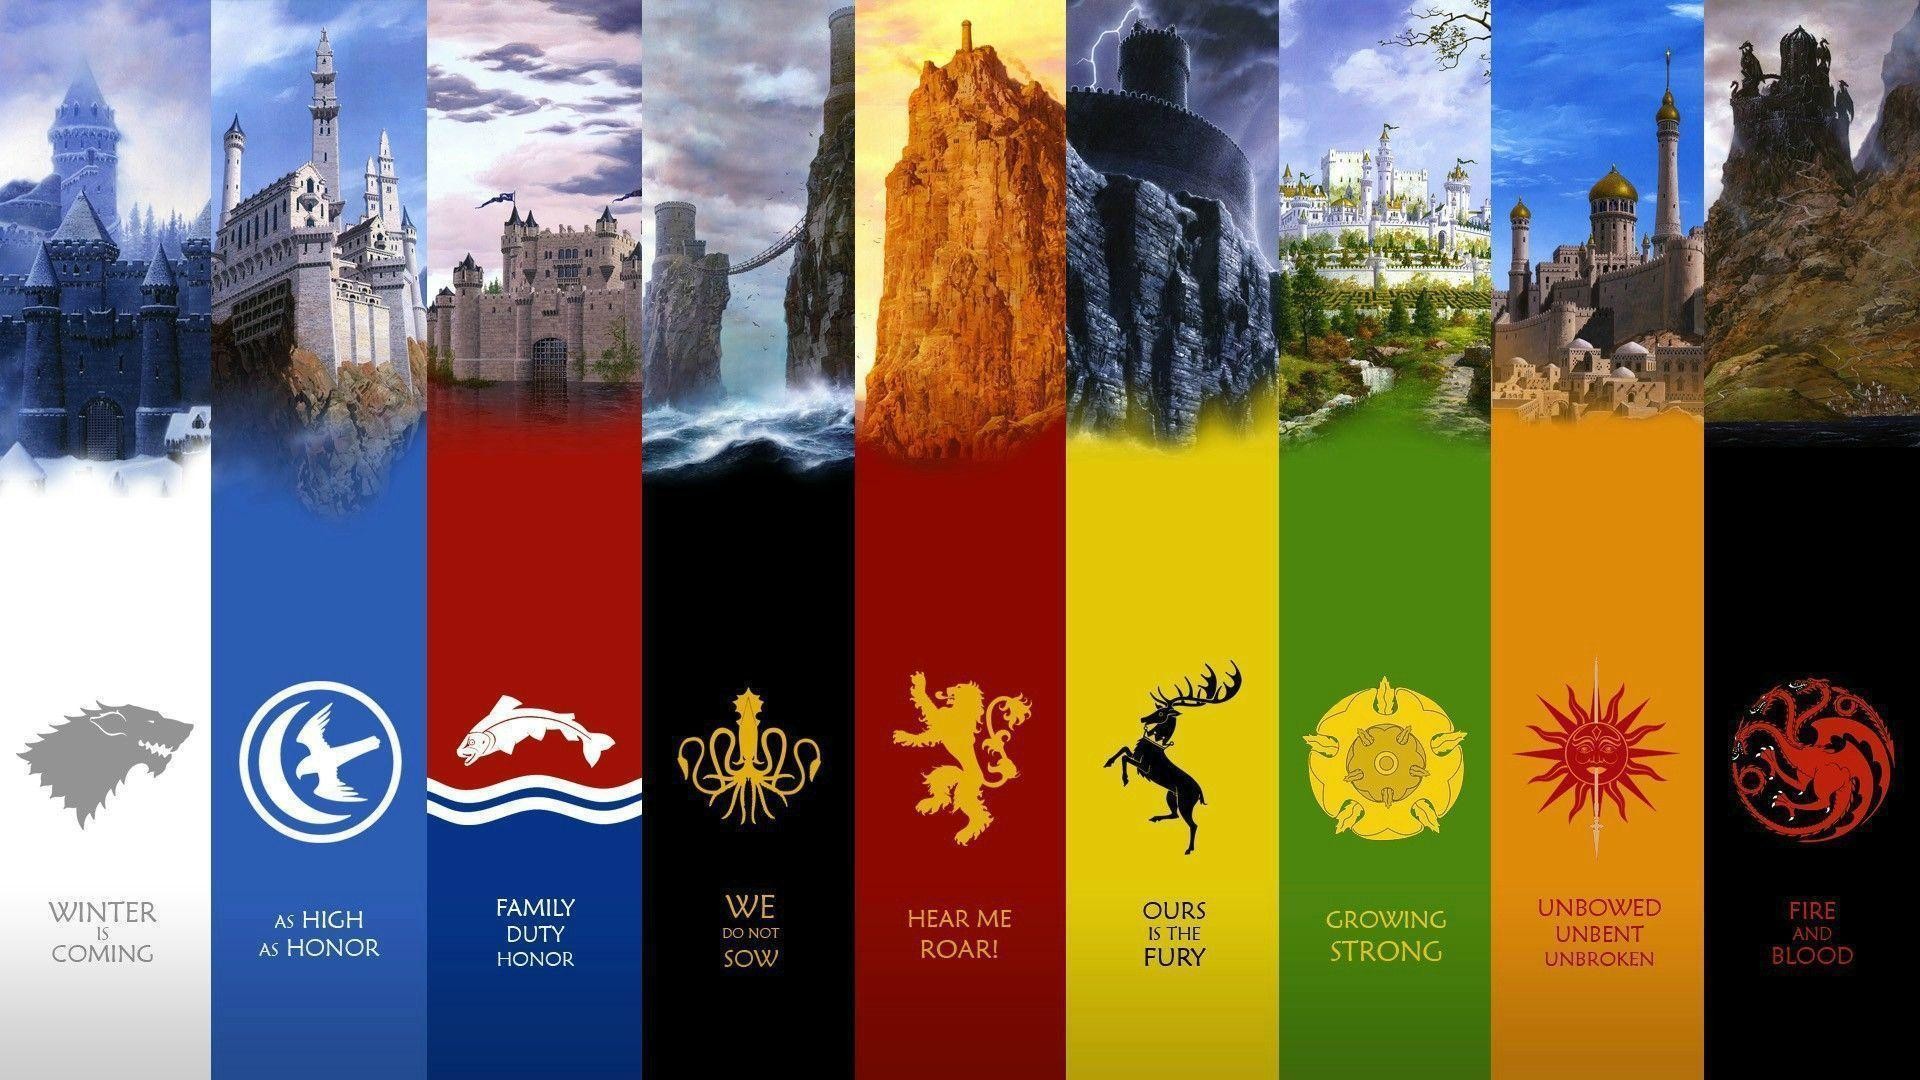 A Song of Ice and Fire Computer Wallpapers, Desktop Backgrounds